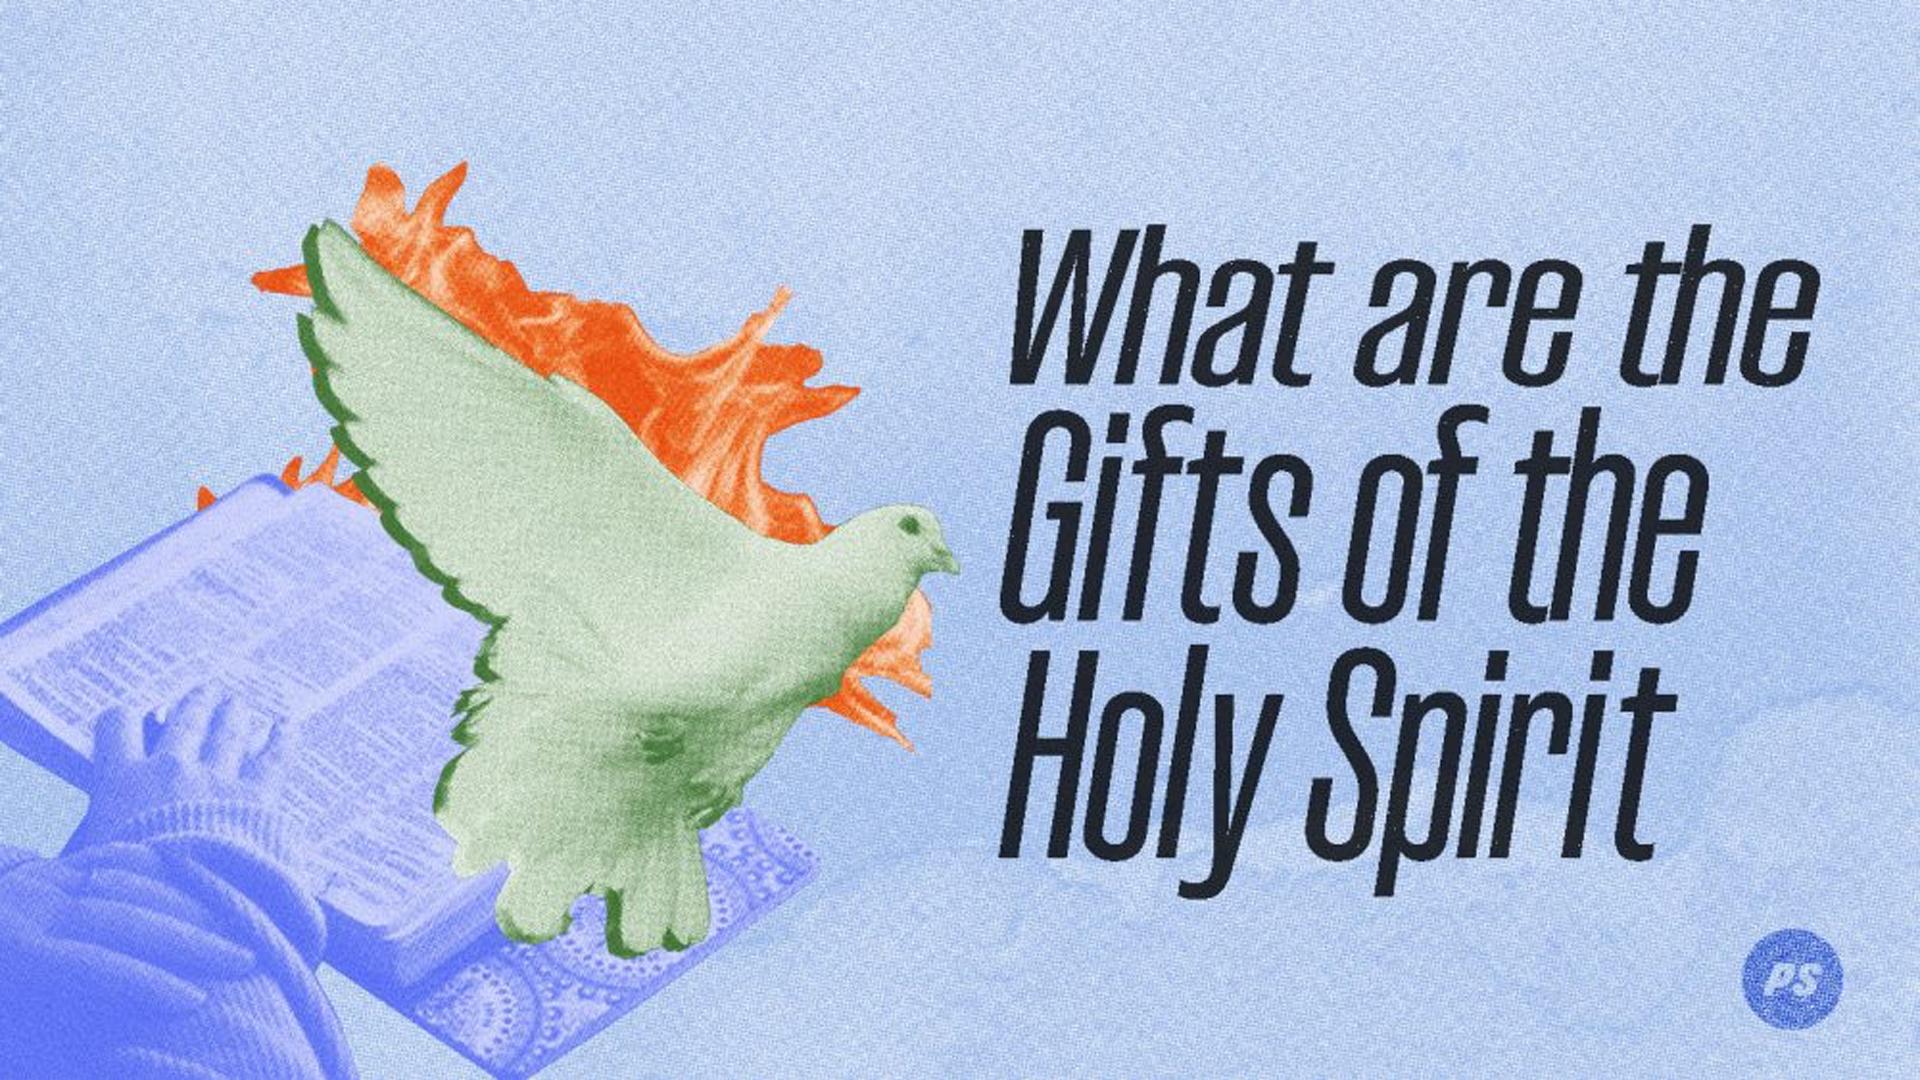 Featured Image for “What are the Gifts of the Holy Spirit?”